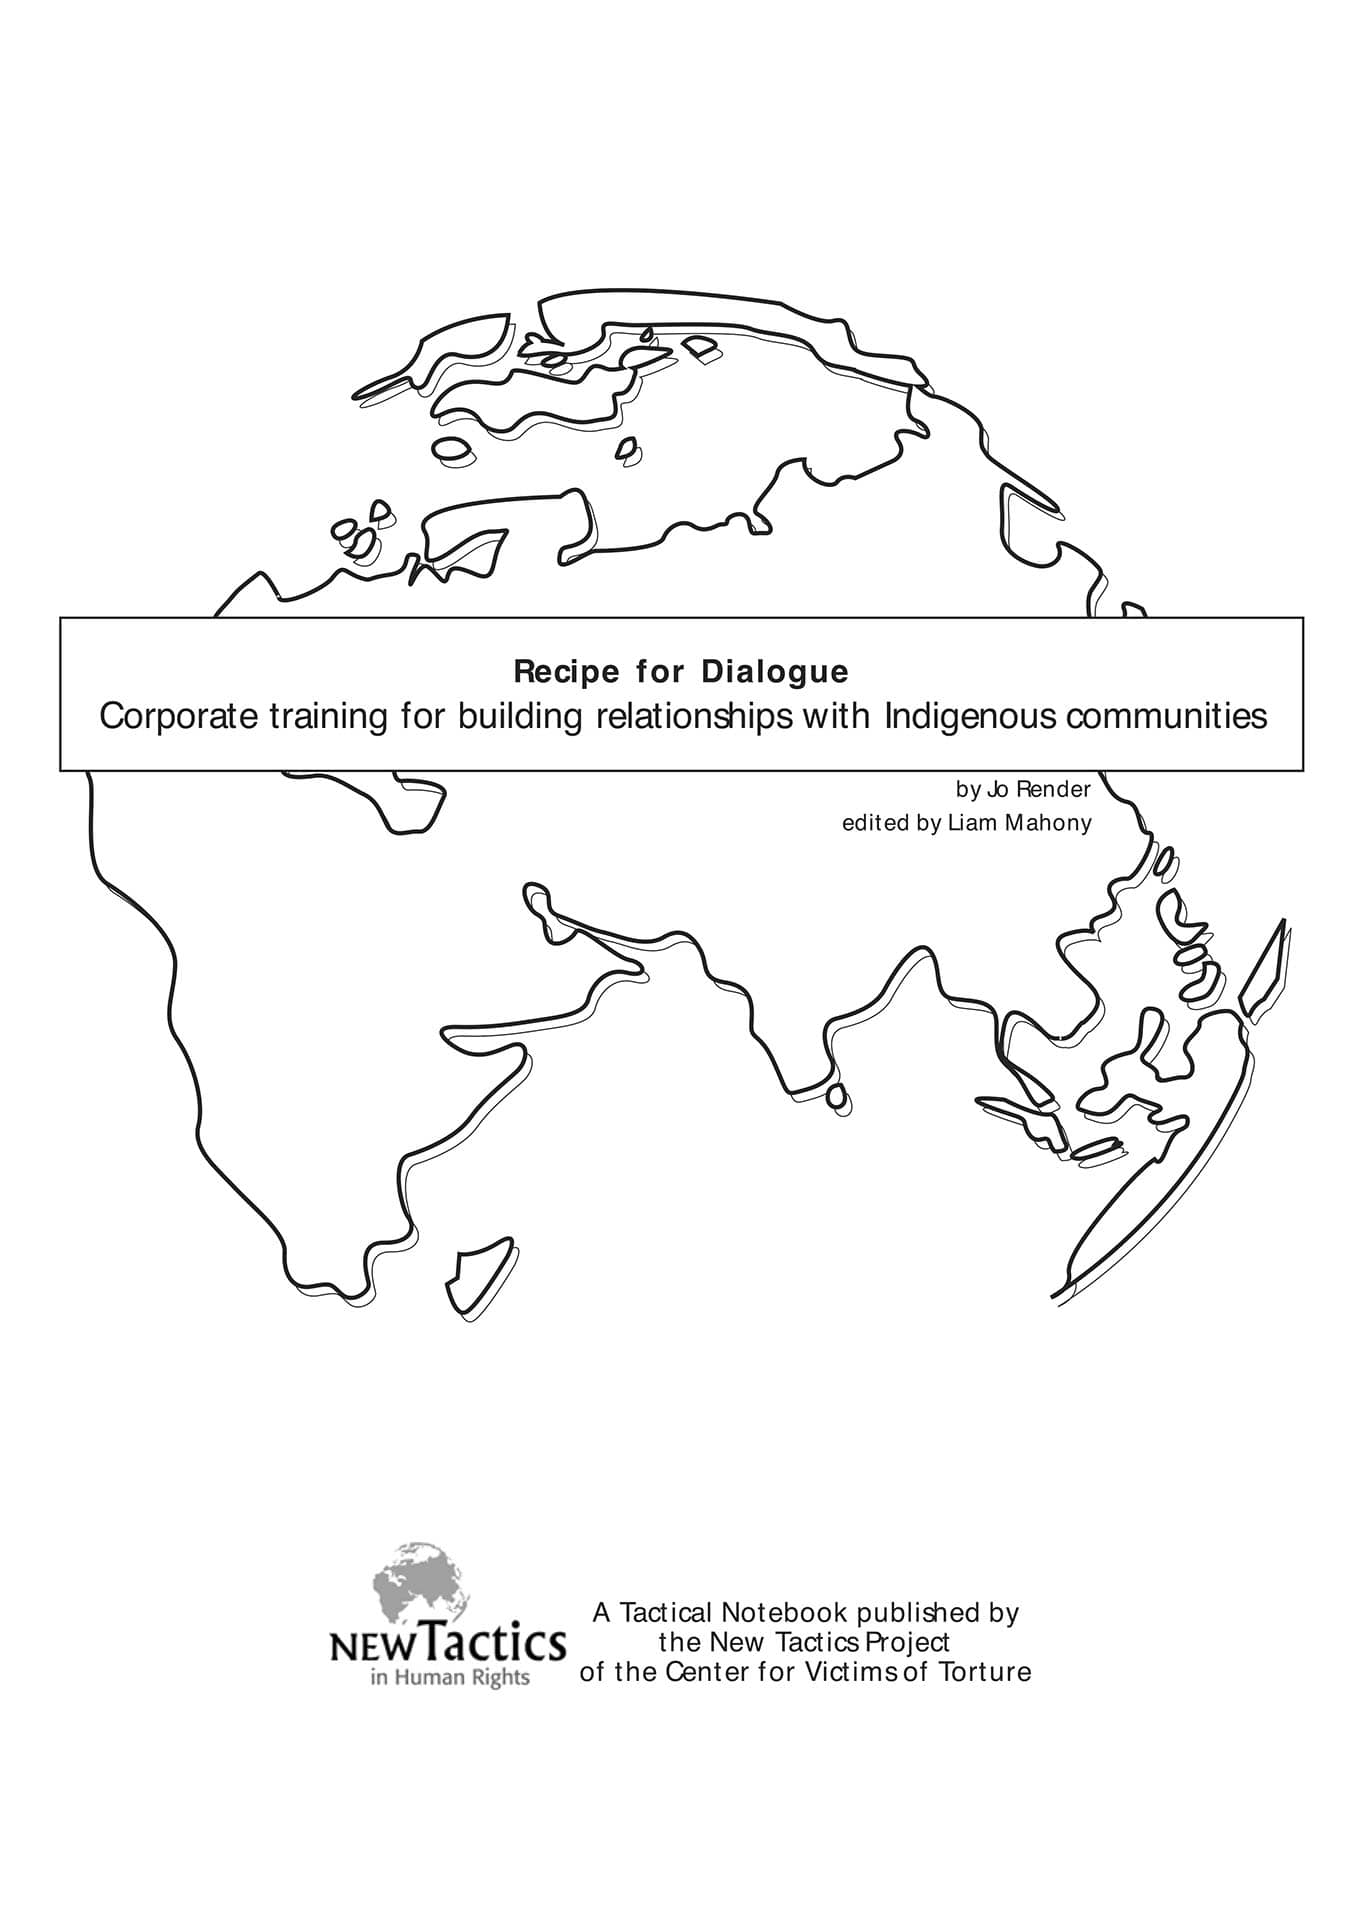 Resource/Extractive Companies and Indigenous Peoples Engagement: Recipe for Dialogue Project (BSR and FPW, 2004)